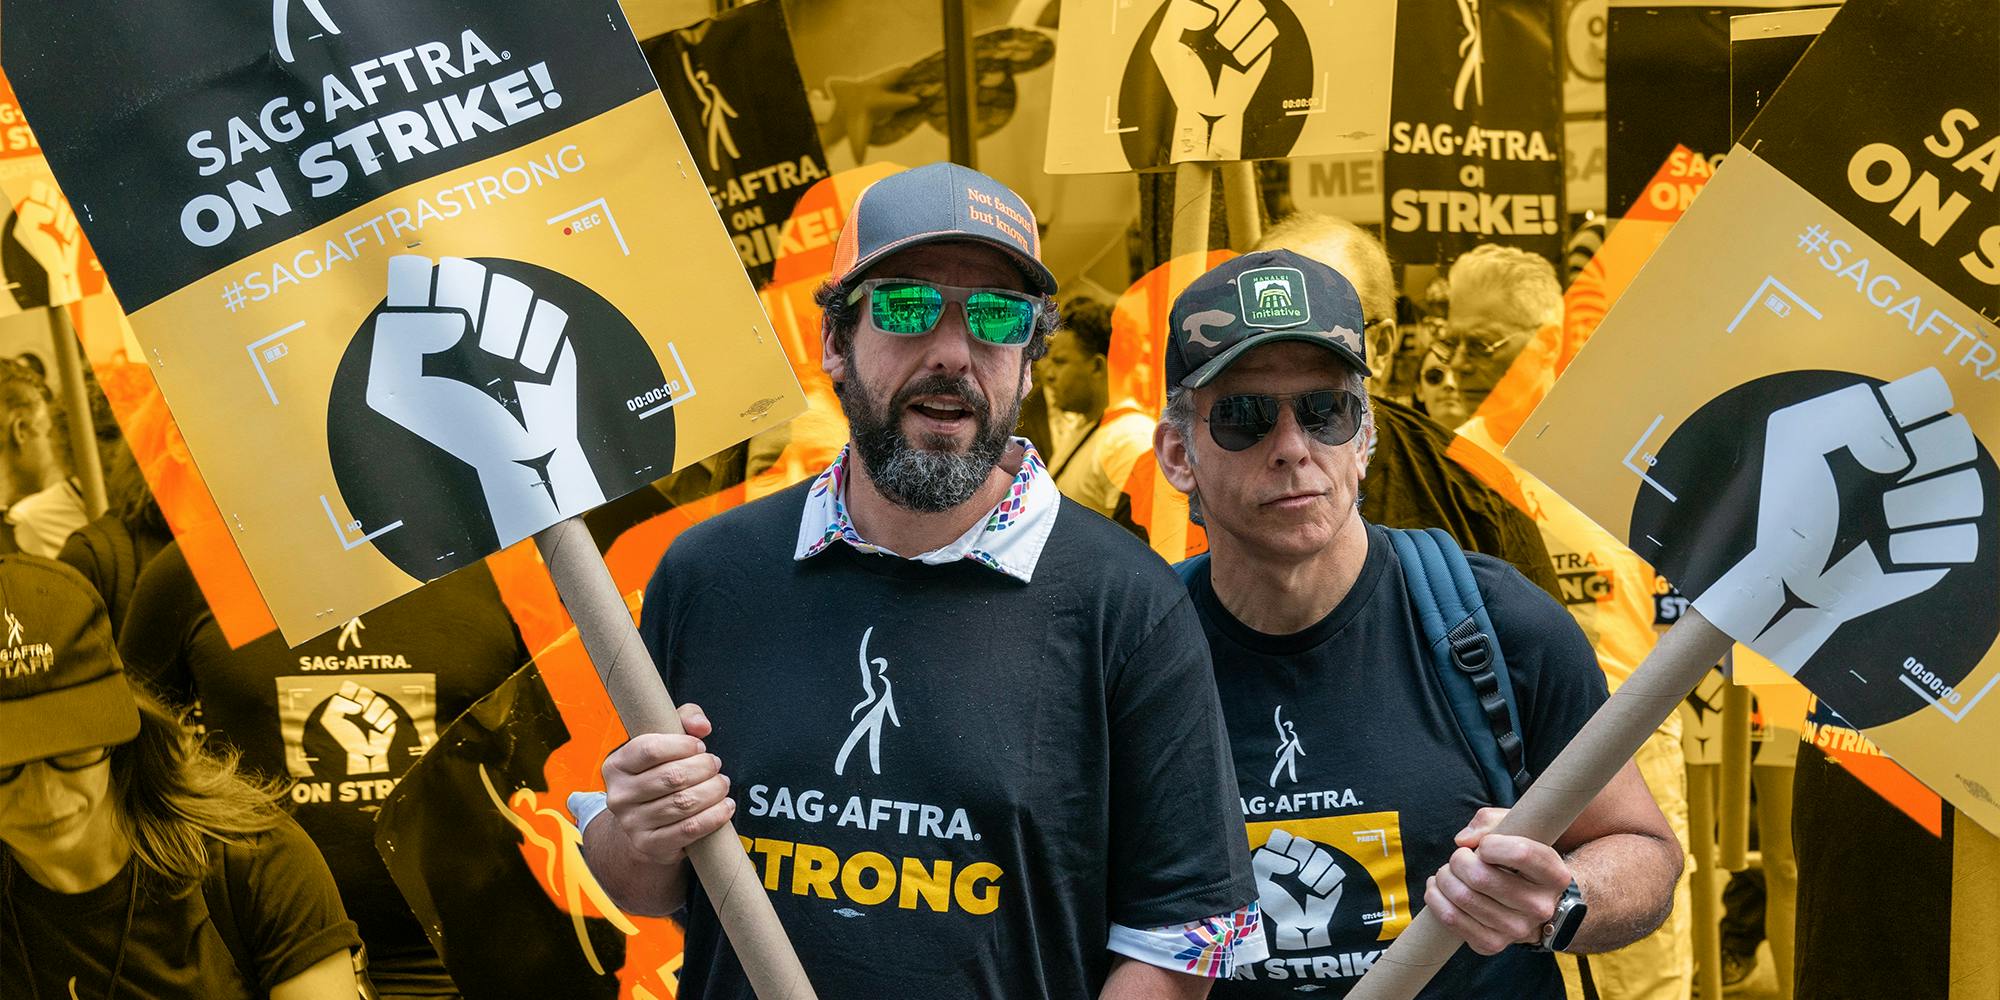 is the writers strike over - Adam Sandler and Ben Stiller joined picket line of strike workers of WGA and SAG-AFTRA in front of NBCUniversal headquarters in New York on August 2, 2023